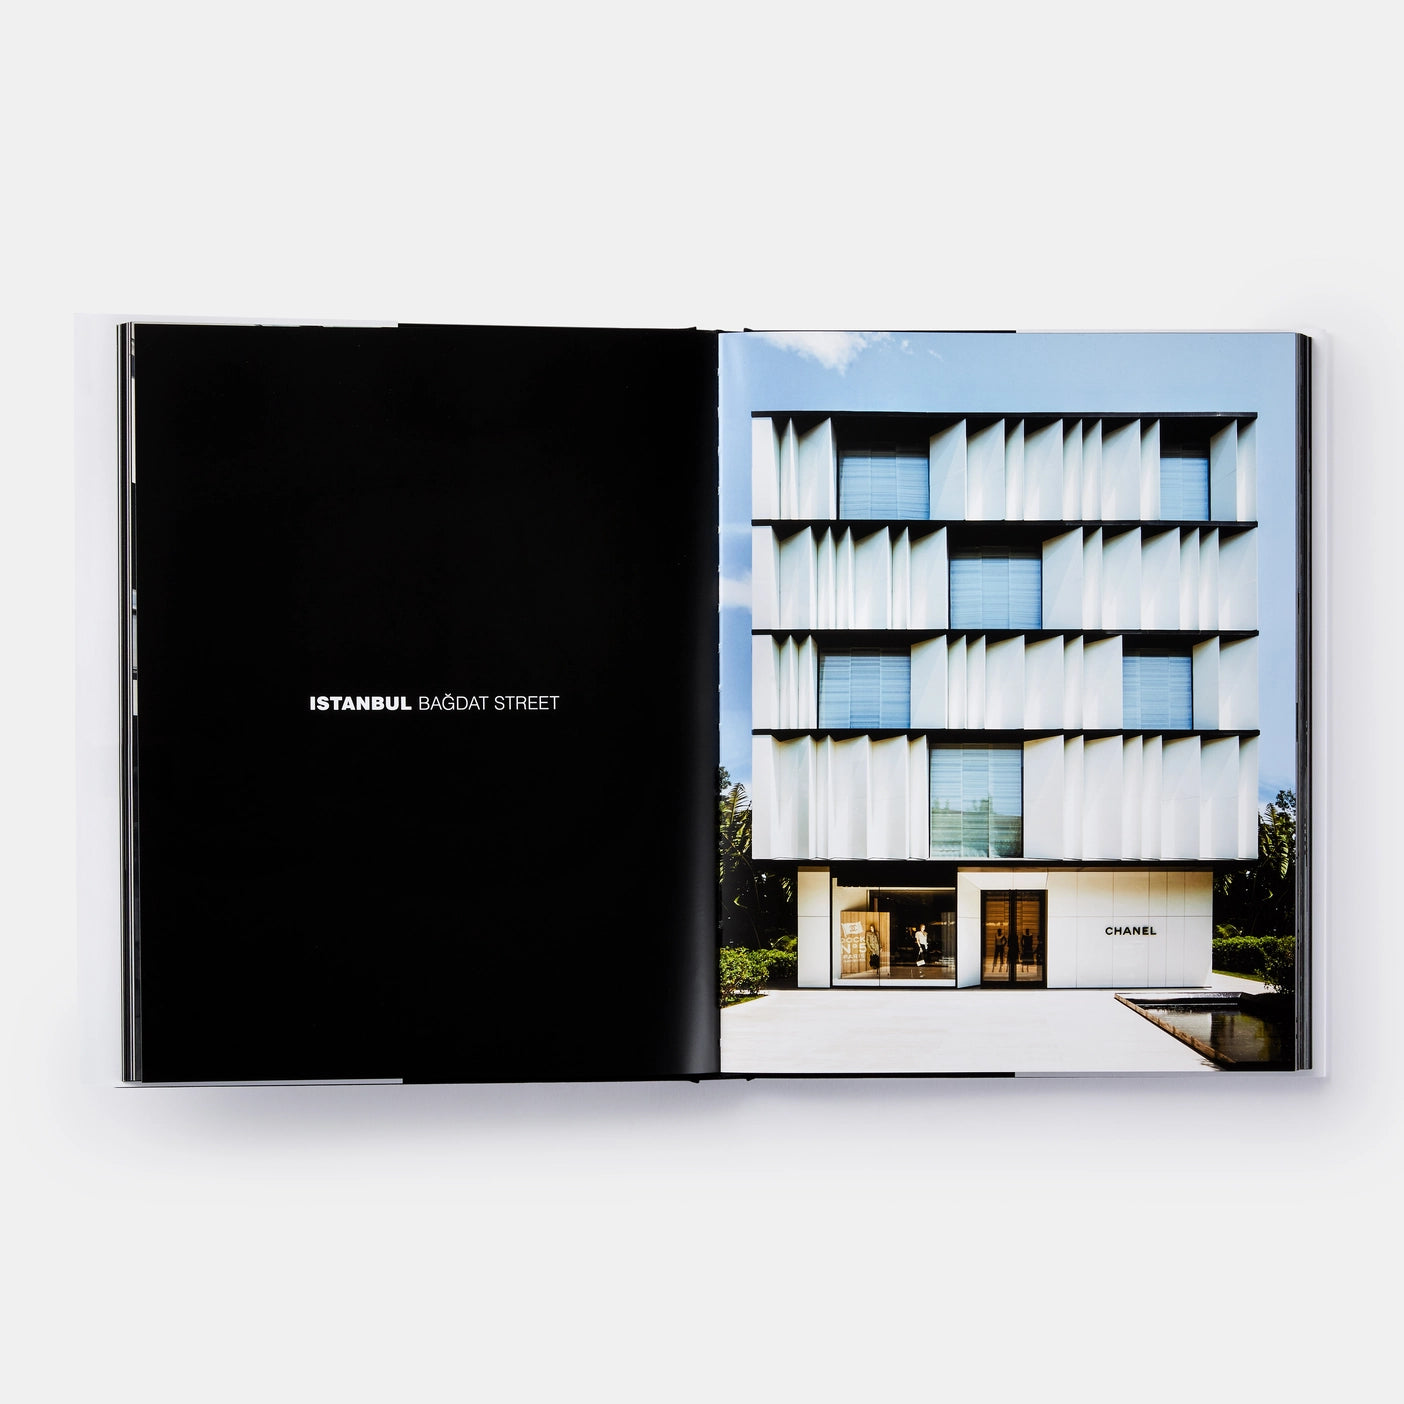 The Architecture of Chanel Peter Marino (pre-order)